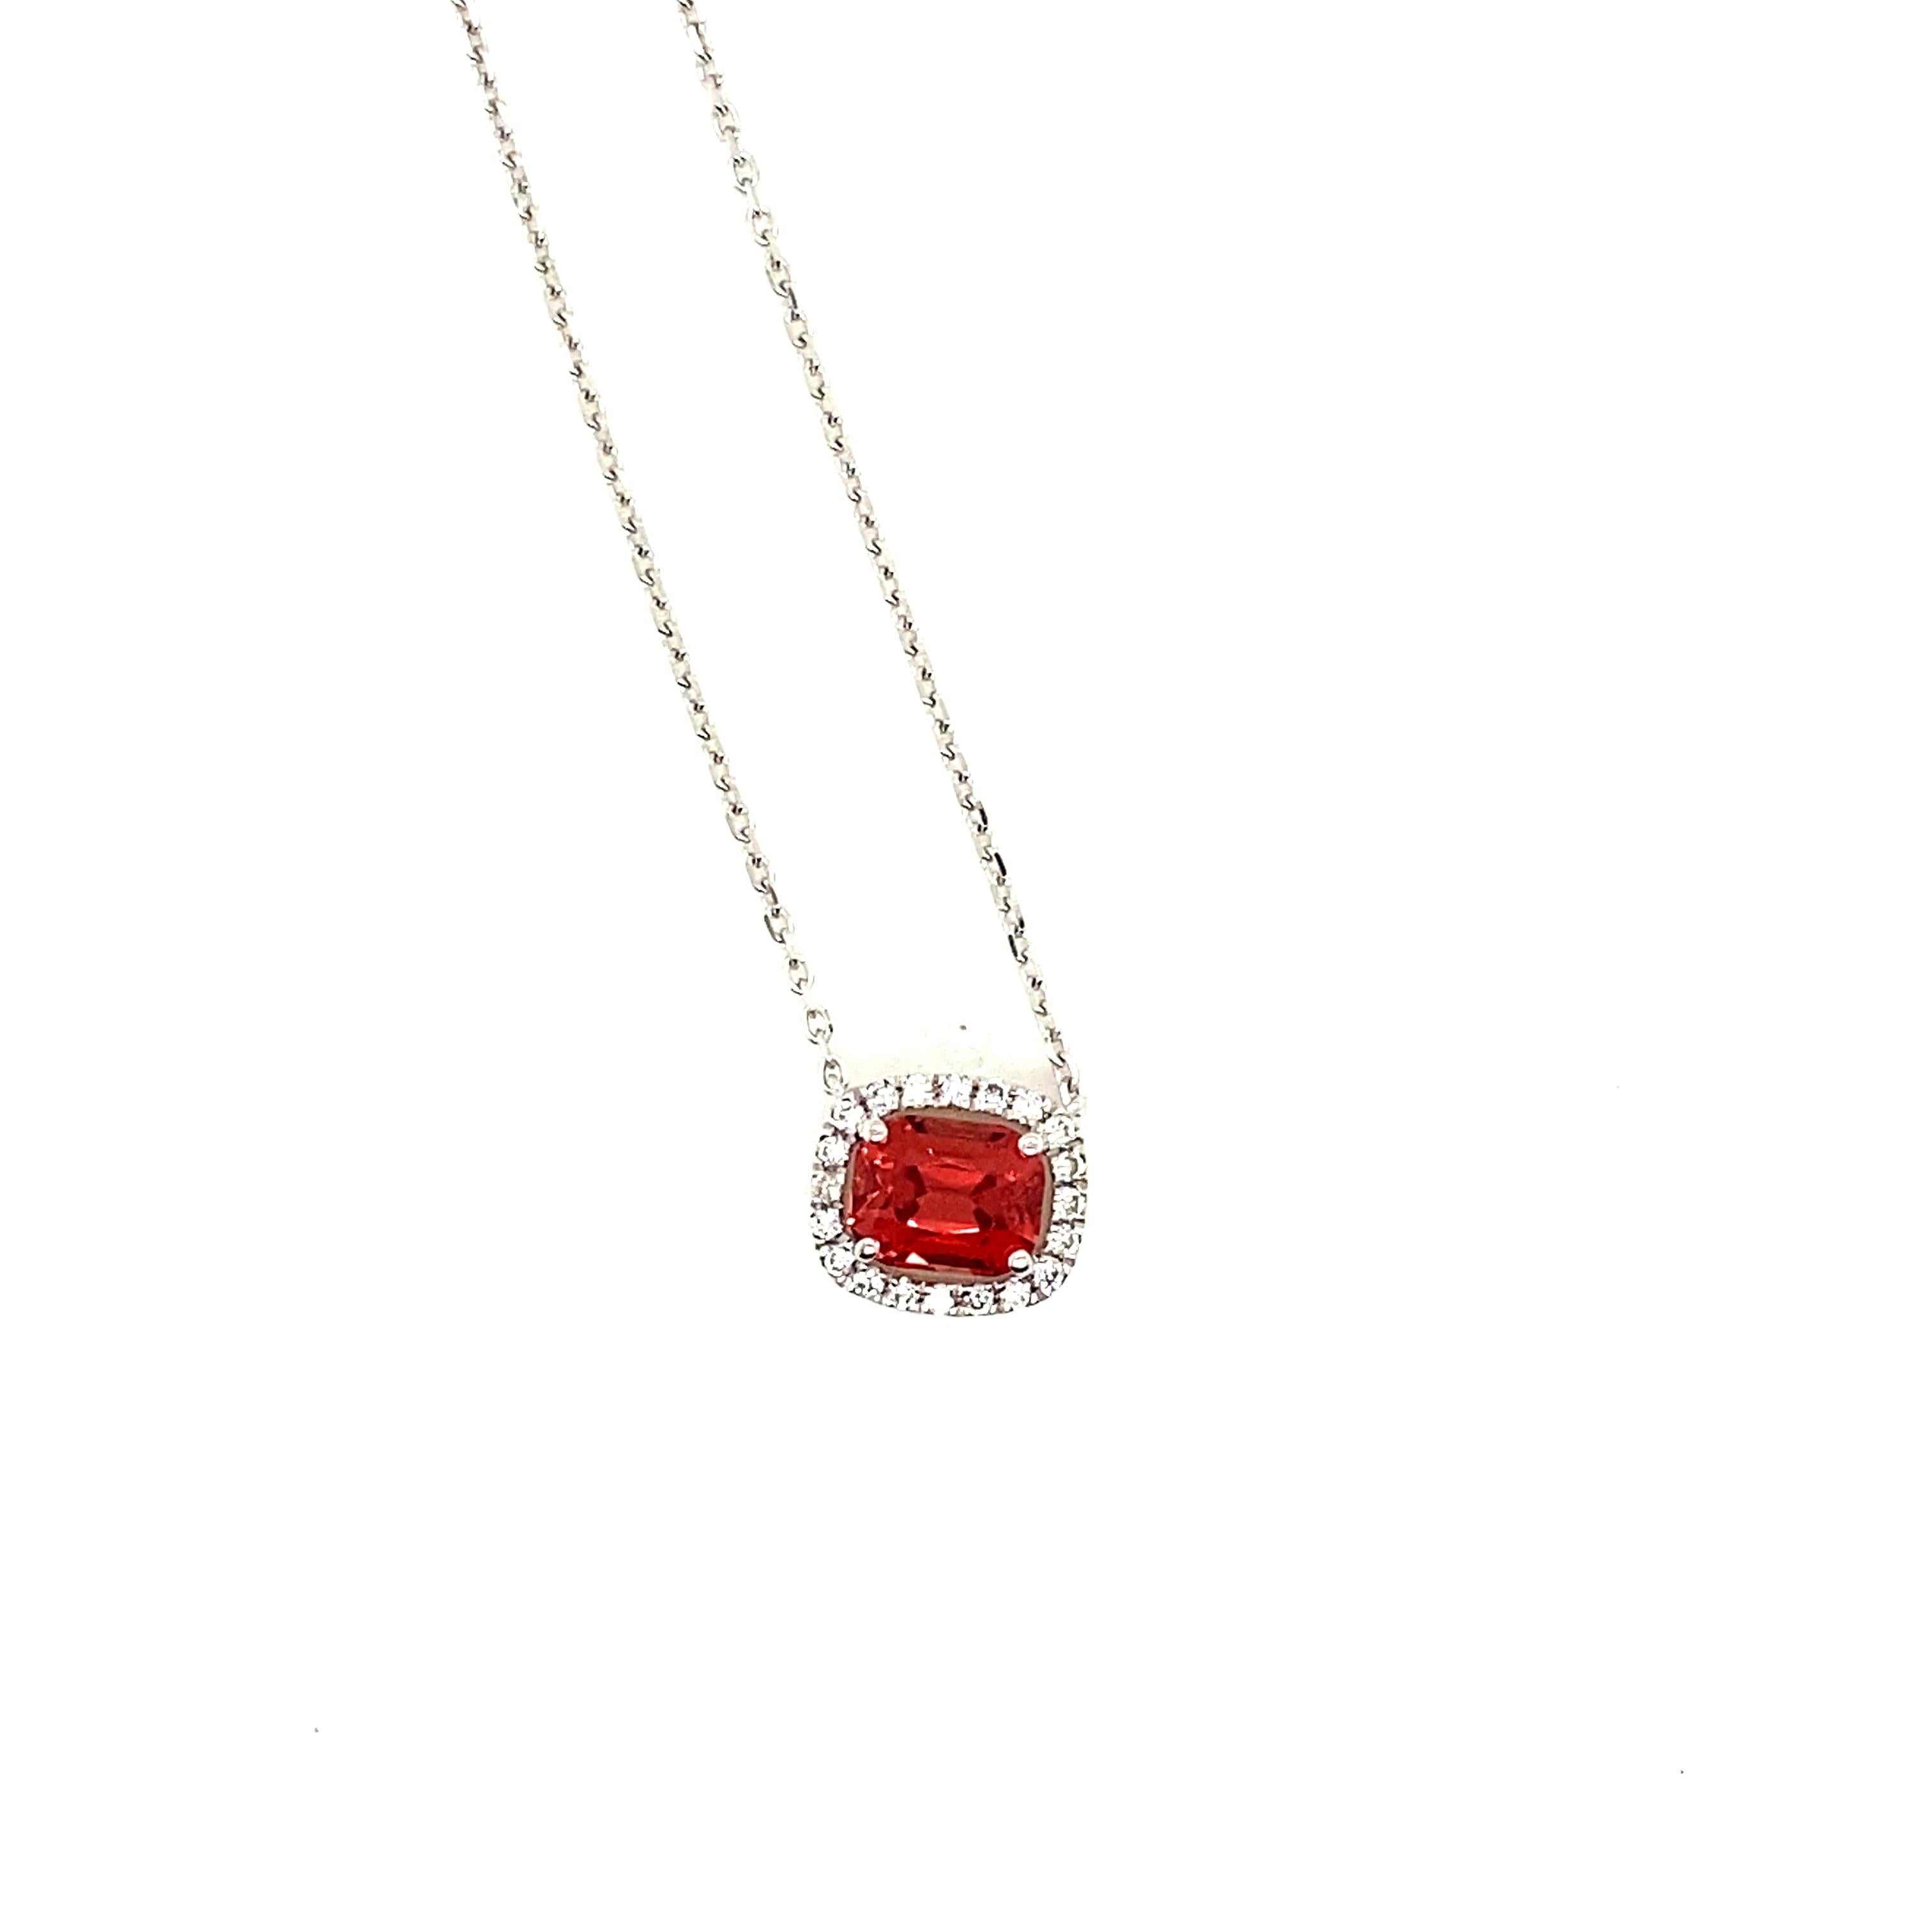 1.19 Carat Cushion-Cut Burma No Heat Spinel and White Diamond Pendant Necklace:

A beautiful pendant necklace, it features a 1.19 carat cushion-cut unheated Burmese spinel in the centre surrounded by a halo of white round-brilliant cut diamonds